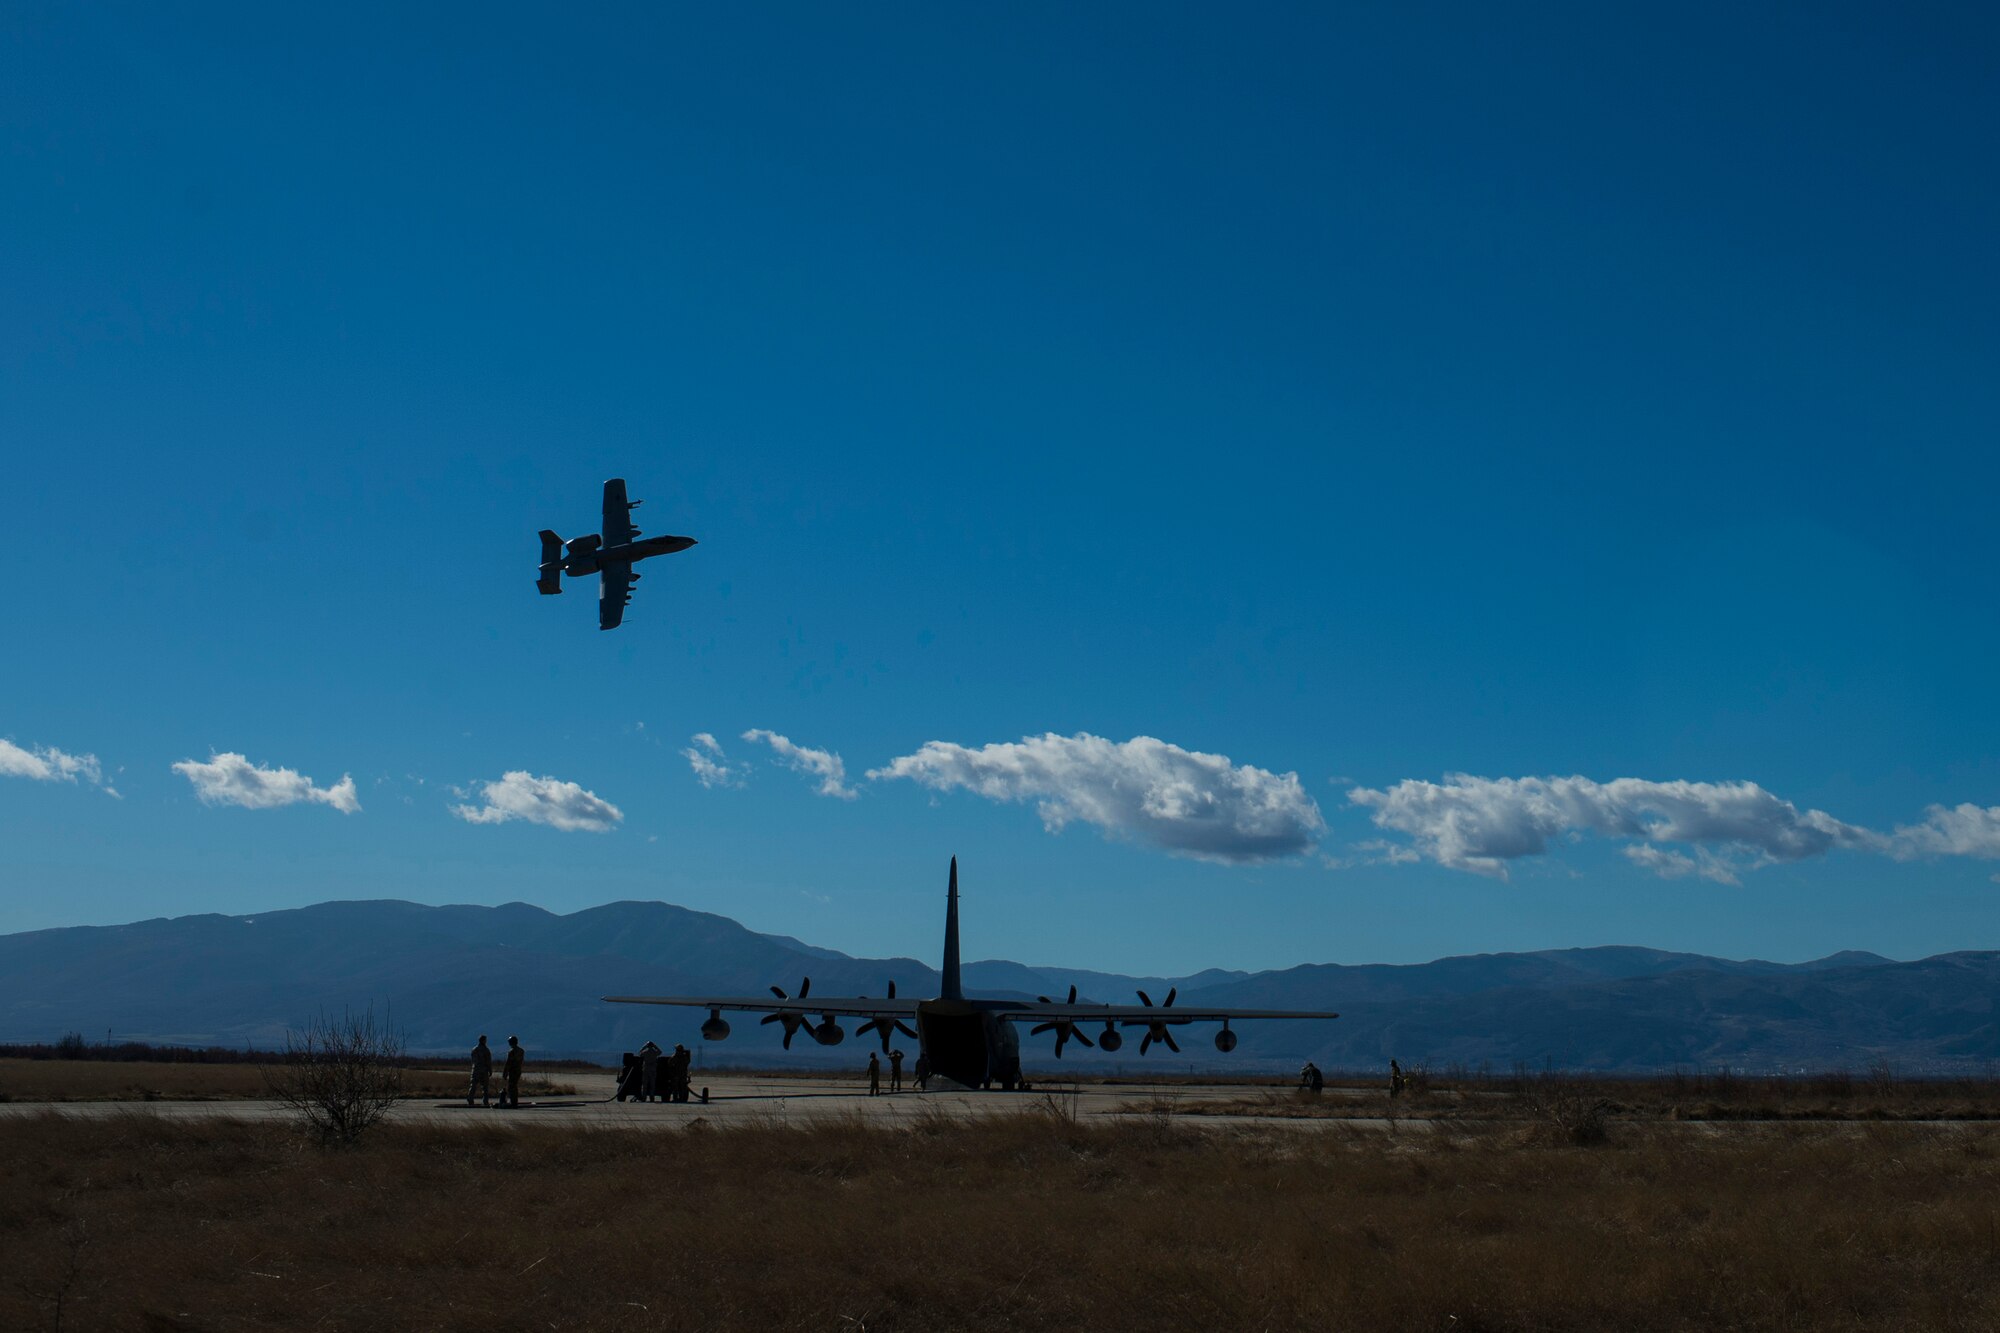 A 74th Expeditionary Fighter Squadron A-10C Thunderbolt II aircraft flies over an MC-130J Commando II aircraft, assigned to the 67th Special Operations Squadron, during a training exercise at Plovdiv, Bulgaria, Feb. 11, 2016. The aircraft deployed to Bulgaria in support of Operation Atlantic Resolve to bolster air power capabilities while assuring the U.S. commitment to European security and stability. (U.S. Air Force photo by Airman 1st Class Luke Kitterman/Released)